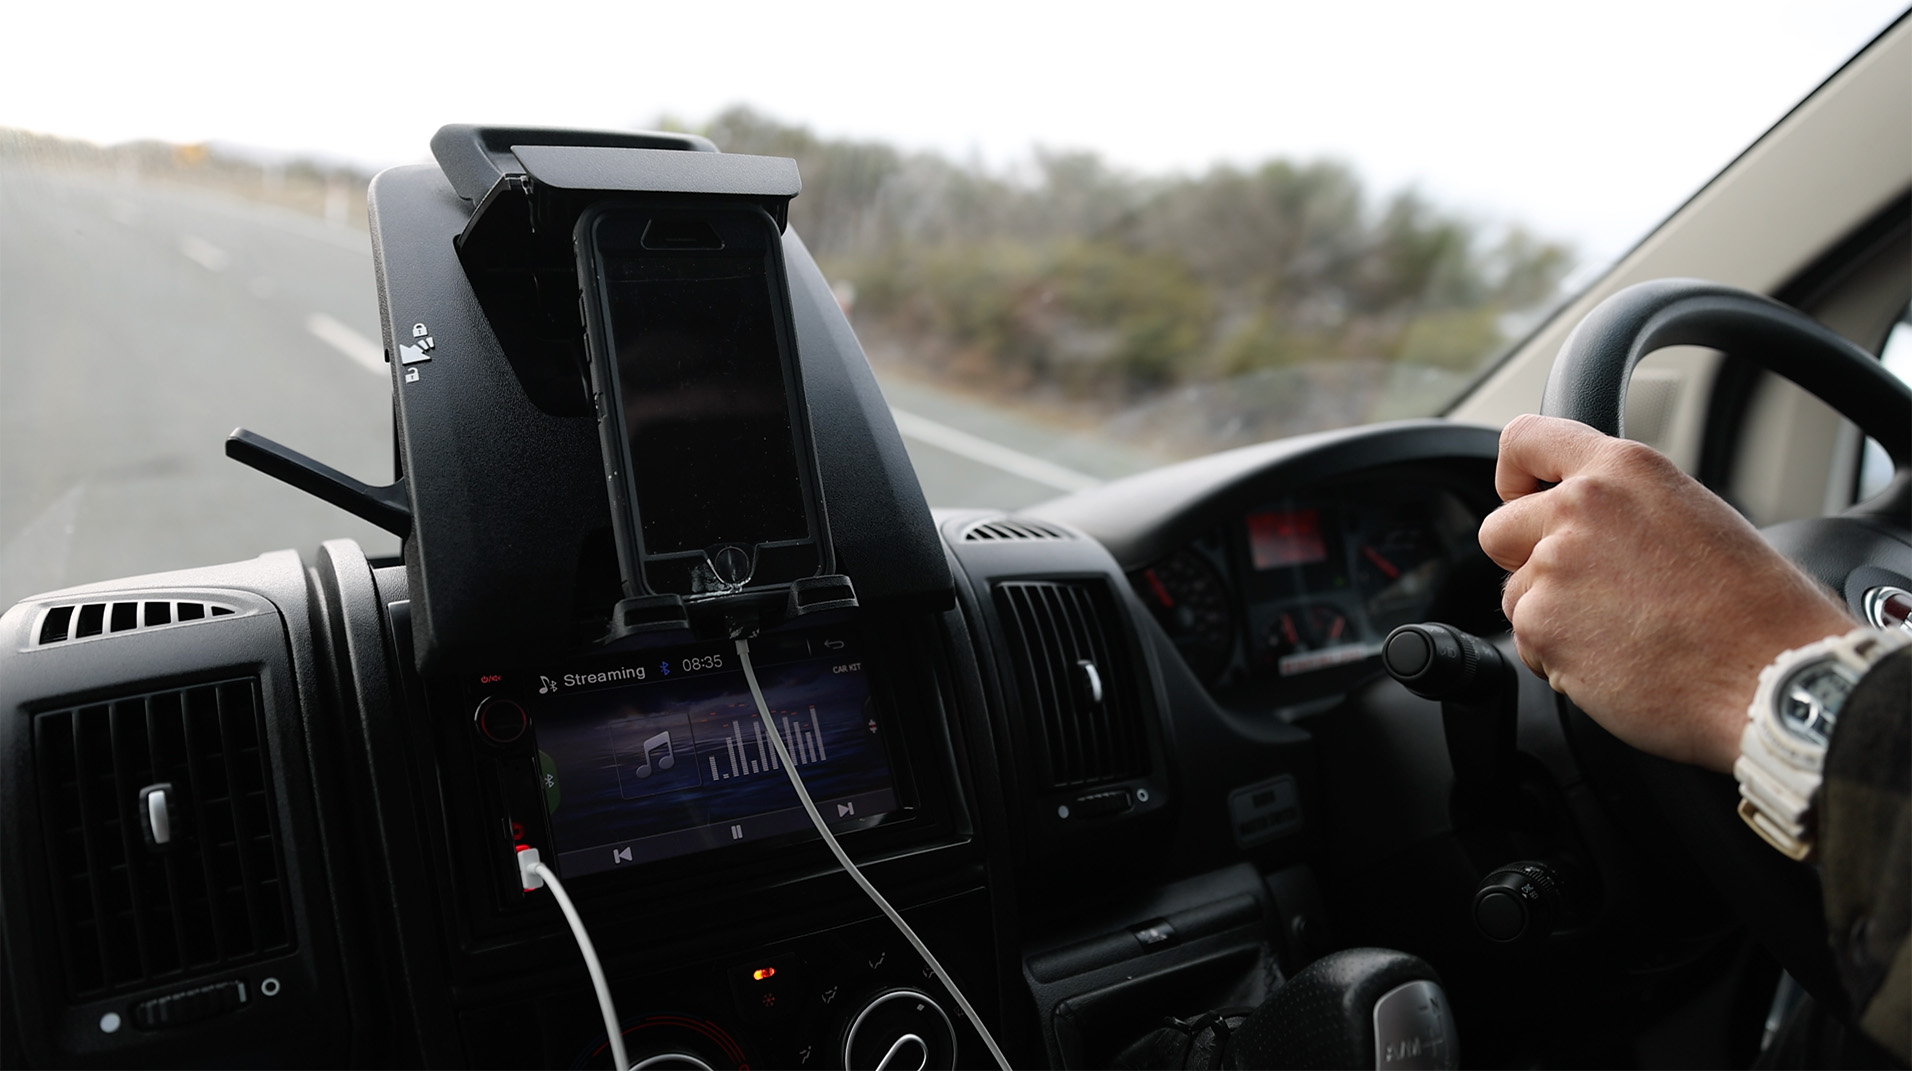 Using phone holder to place mobile phone while driving